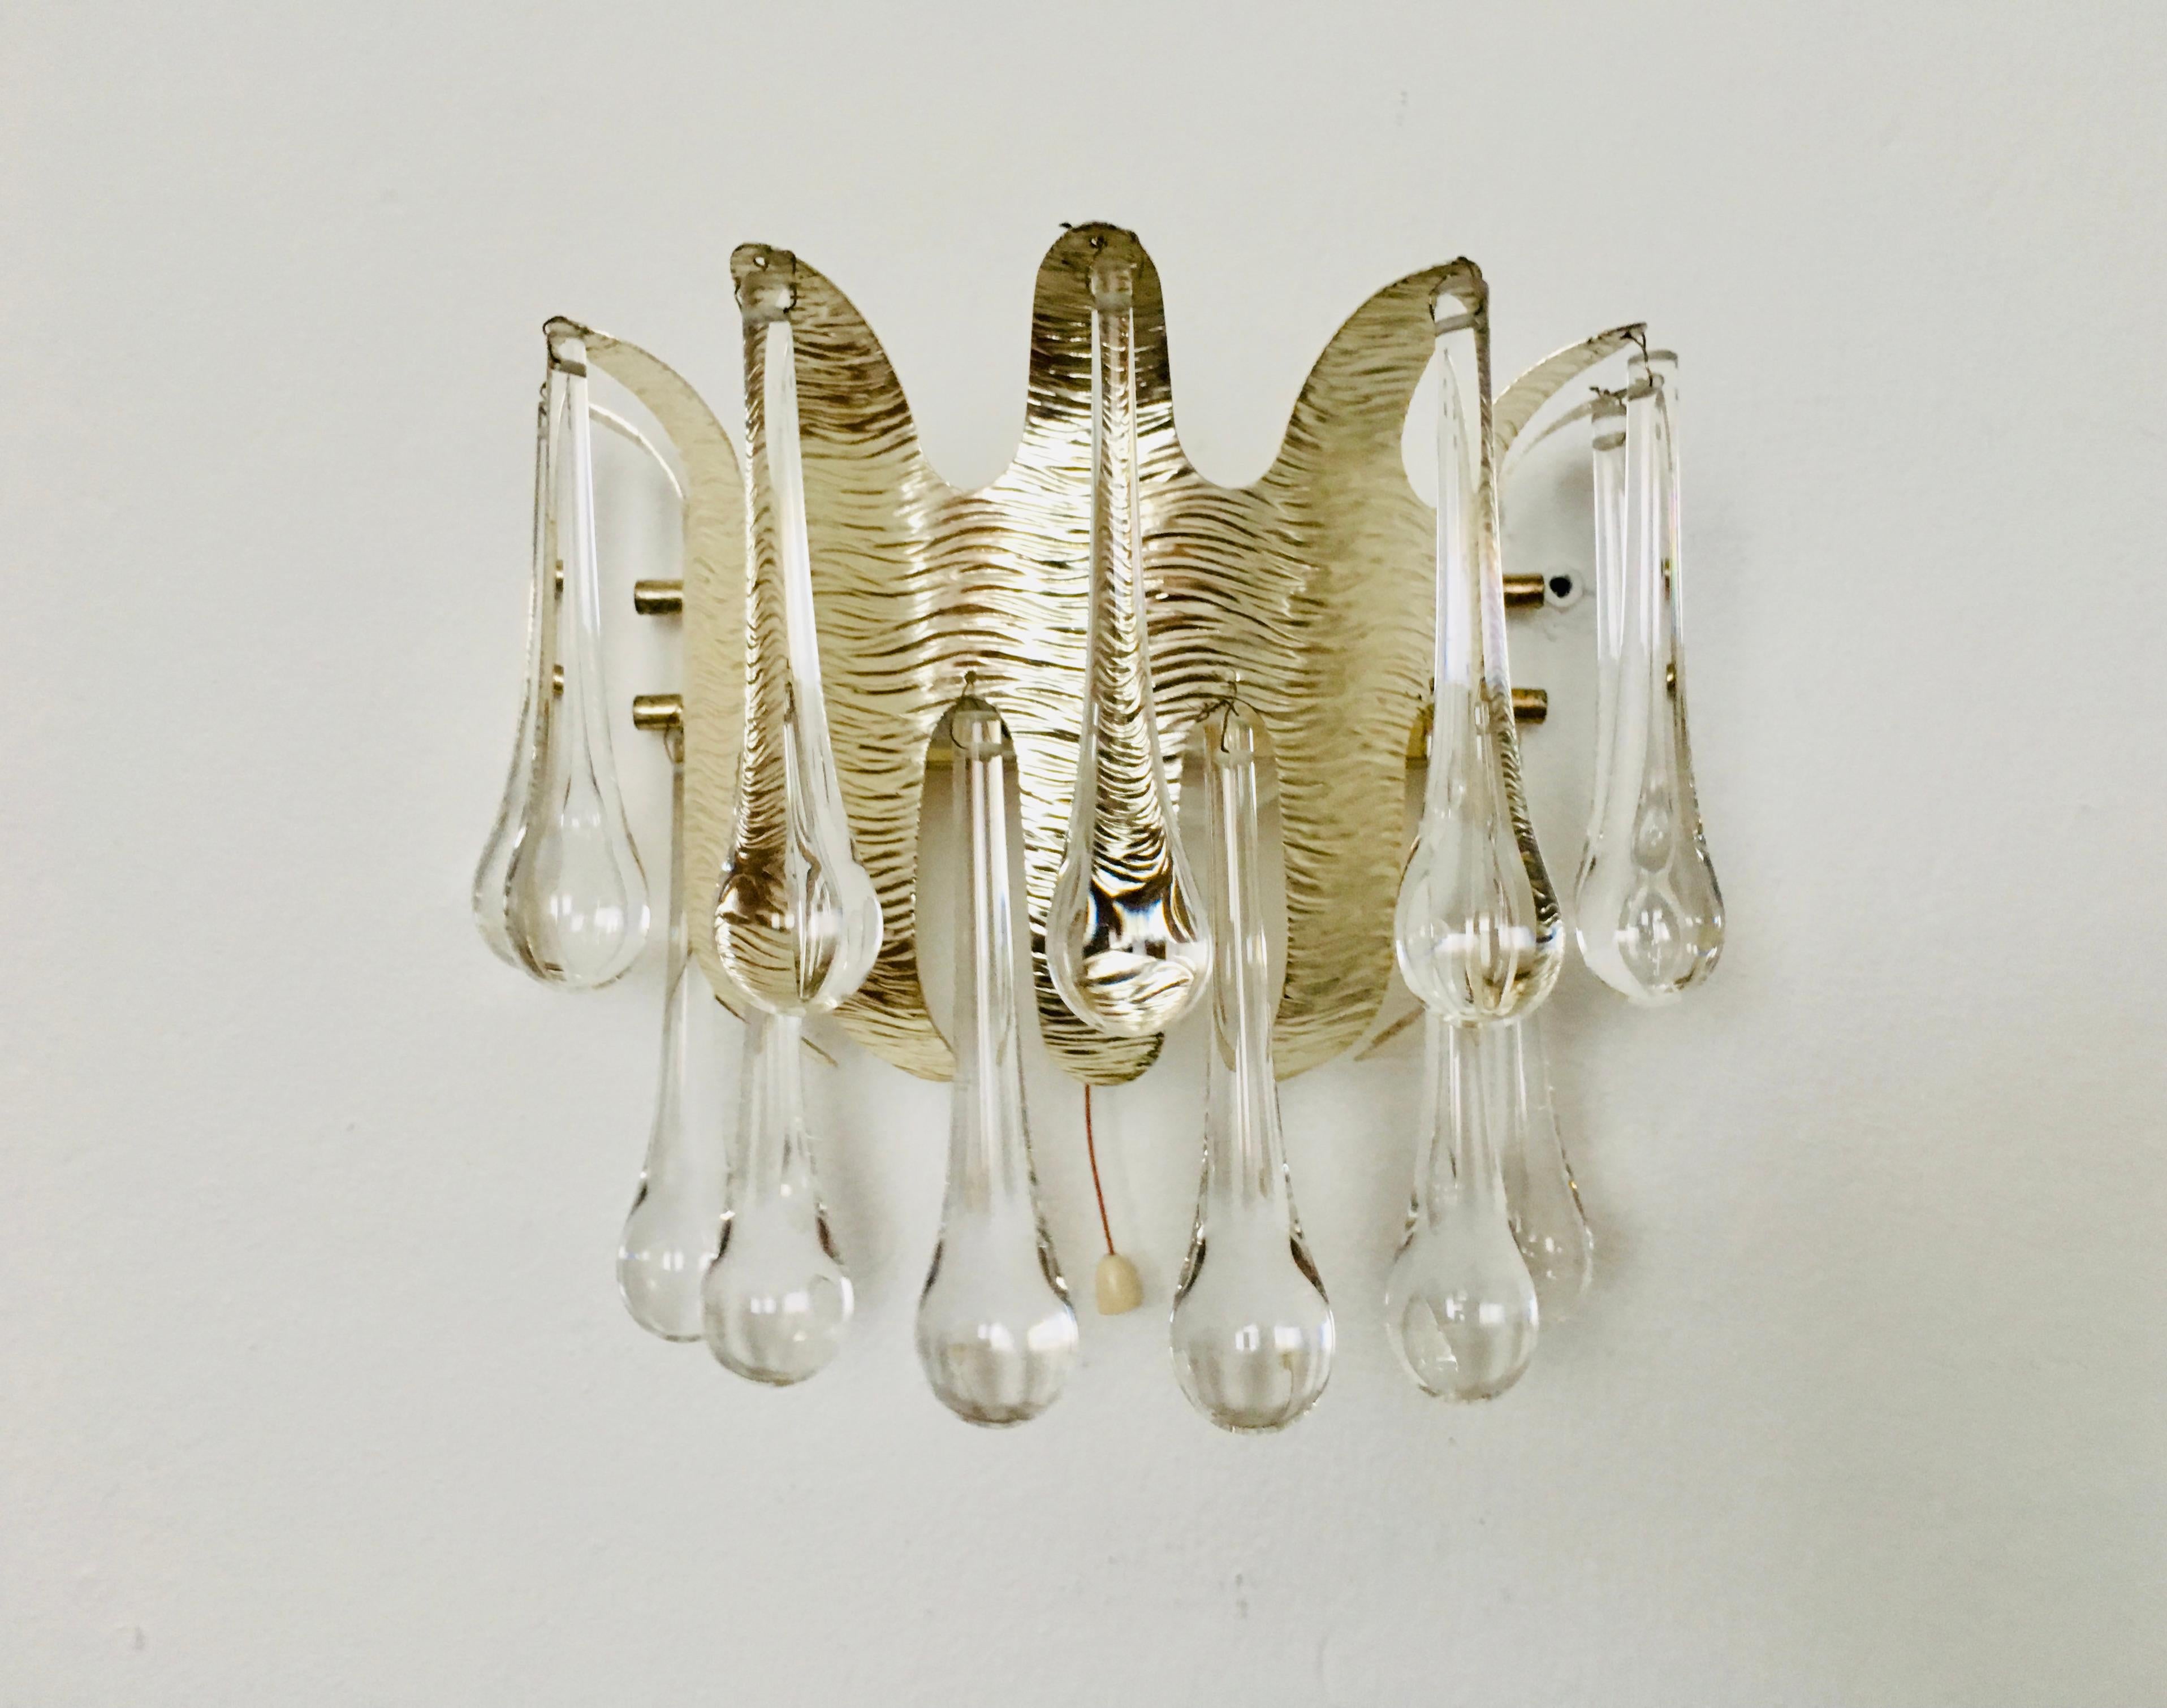 Very beautiful and rare wall lamp from the 1960s.
Very pleasant lighting effect due to the crystal glass, which spreads an elegant, sparkling play of light in the room.
Excitingly beautiful design and high-quality workmanship.

Manufacturer: